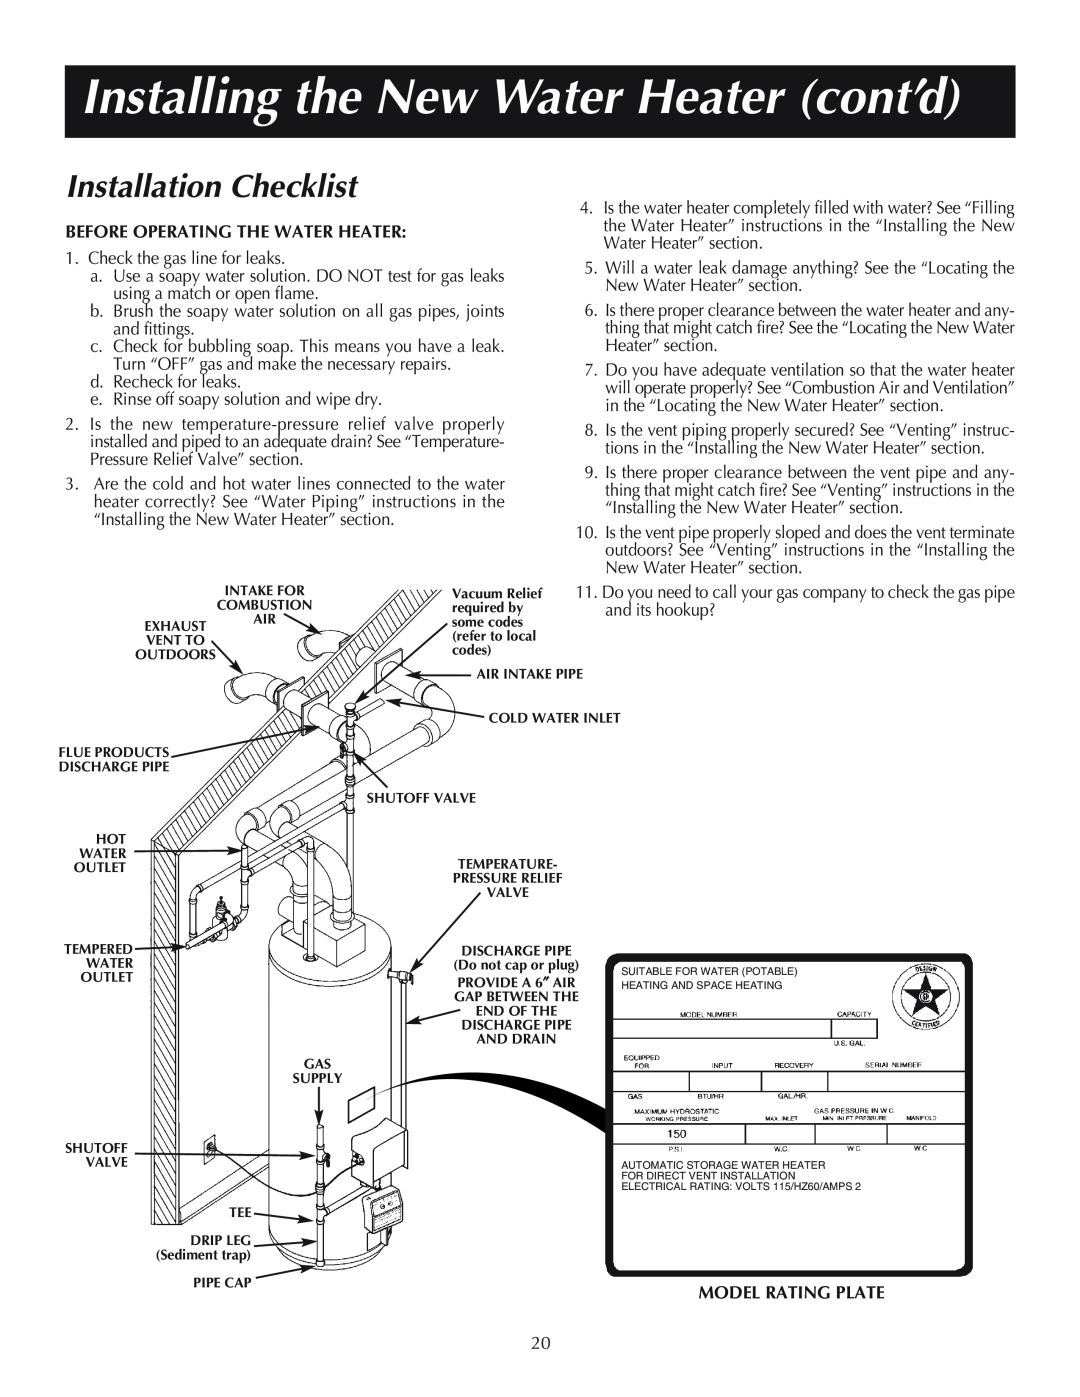 Reliance Water Heaters 184333-001, 606 Installation Checklist, Installing the New Water Heater cont’d, and its hookup? 